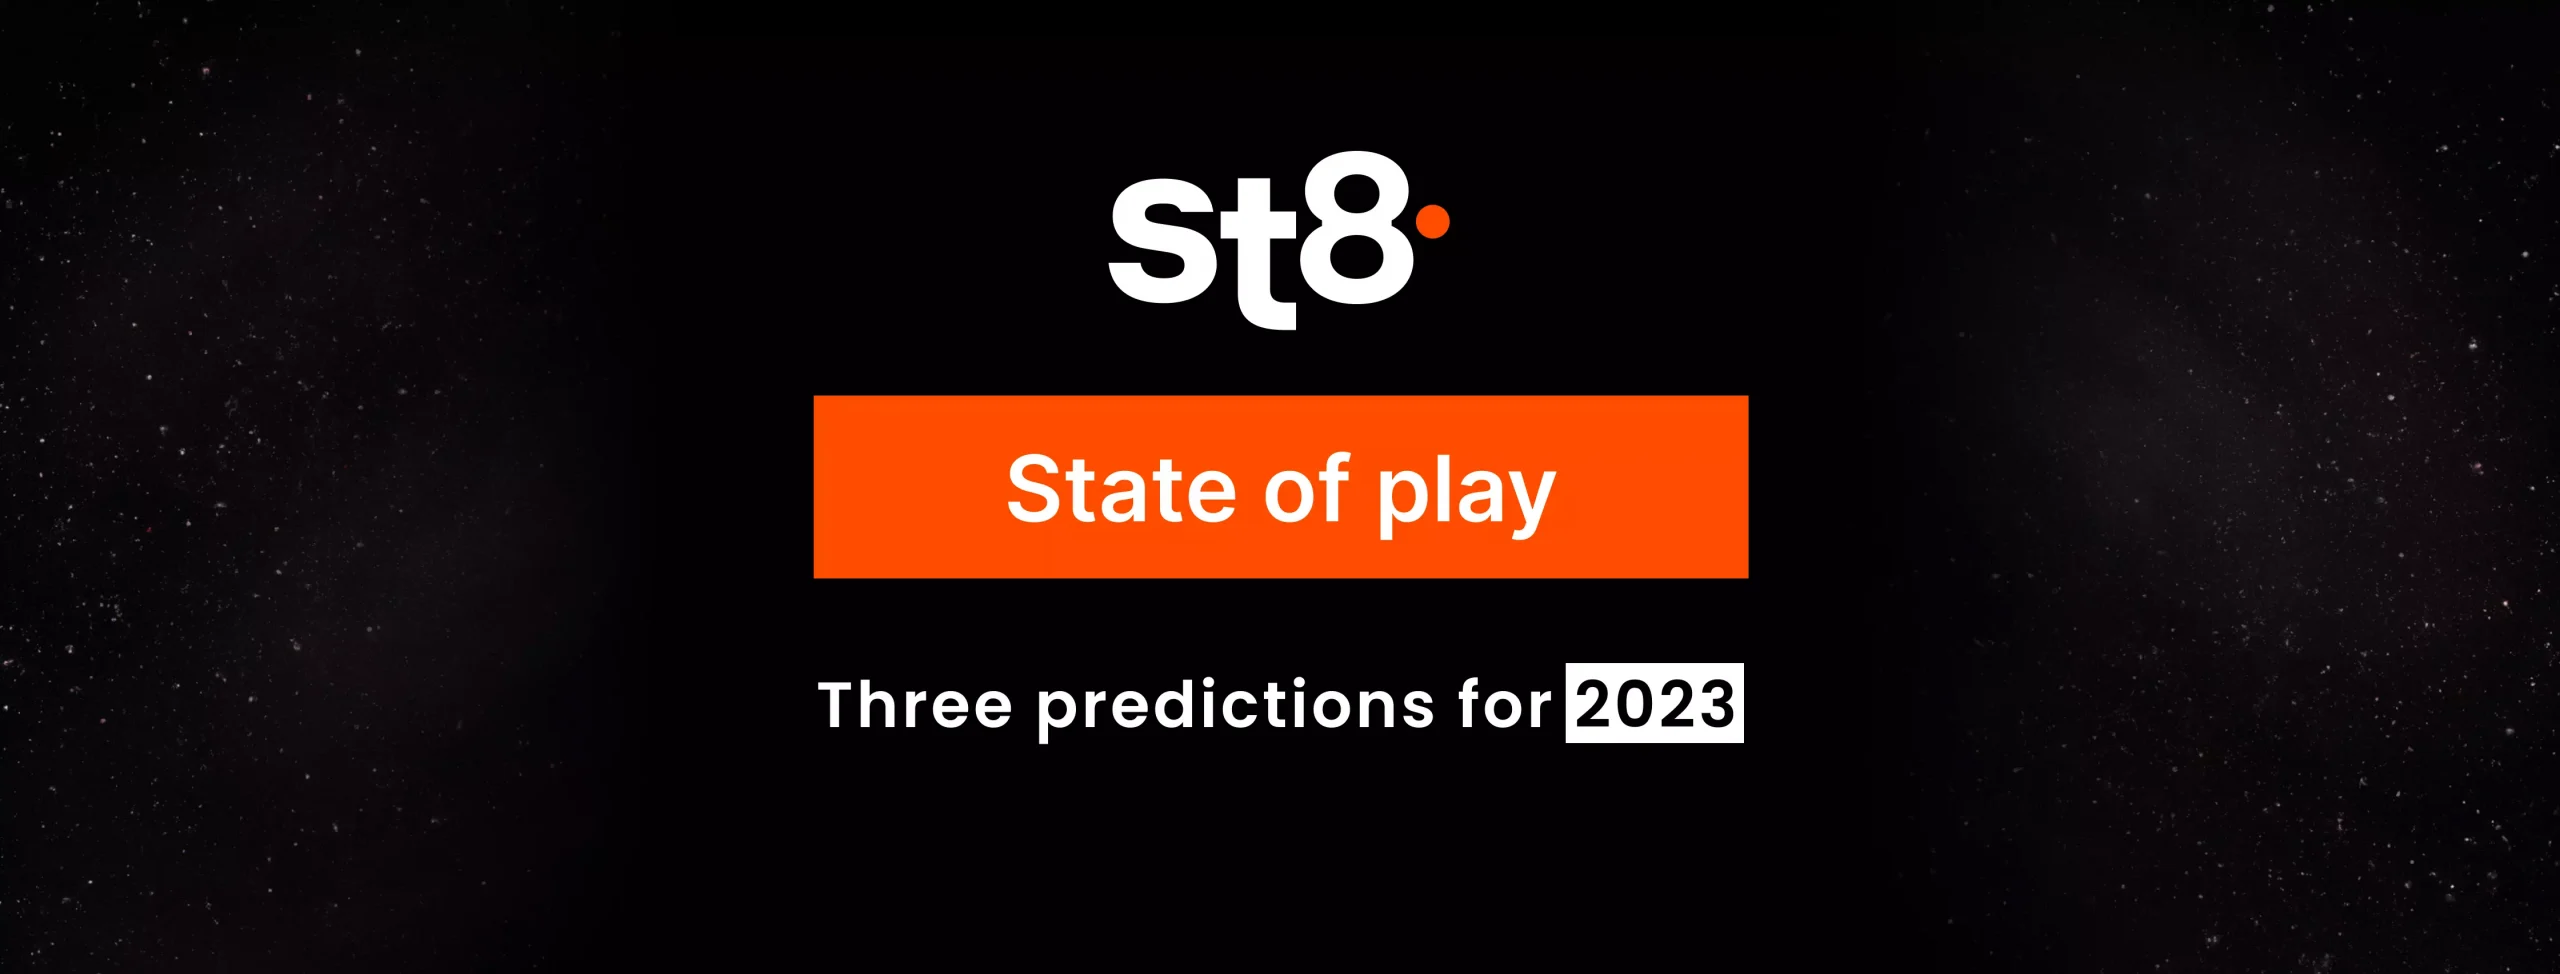 St8.io - 3 predictions for 2023. What startups should focus on in 2023